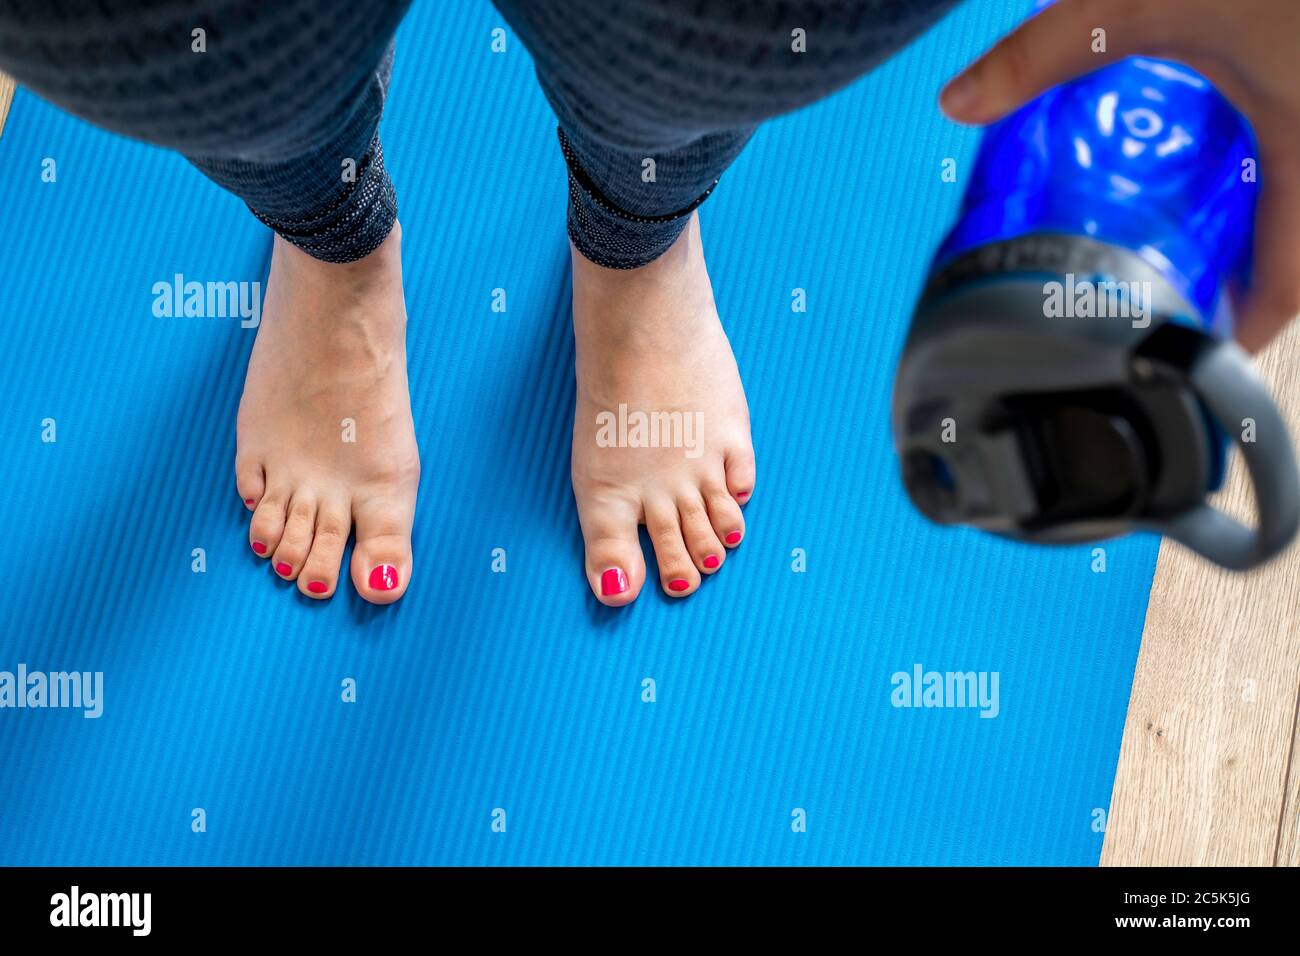 Woman practicing yoga, holding a bottle water. Feet with pink pedicure of woman on blue mat, first person top view. Concept of indoor workout Stock Photo